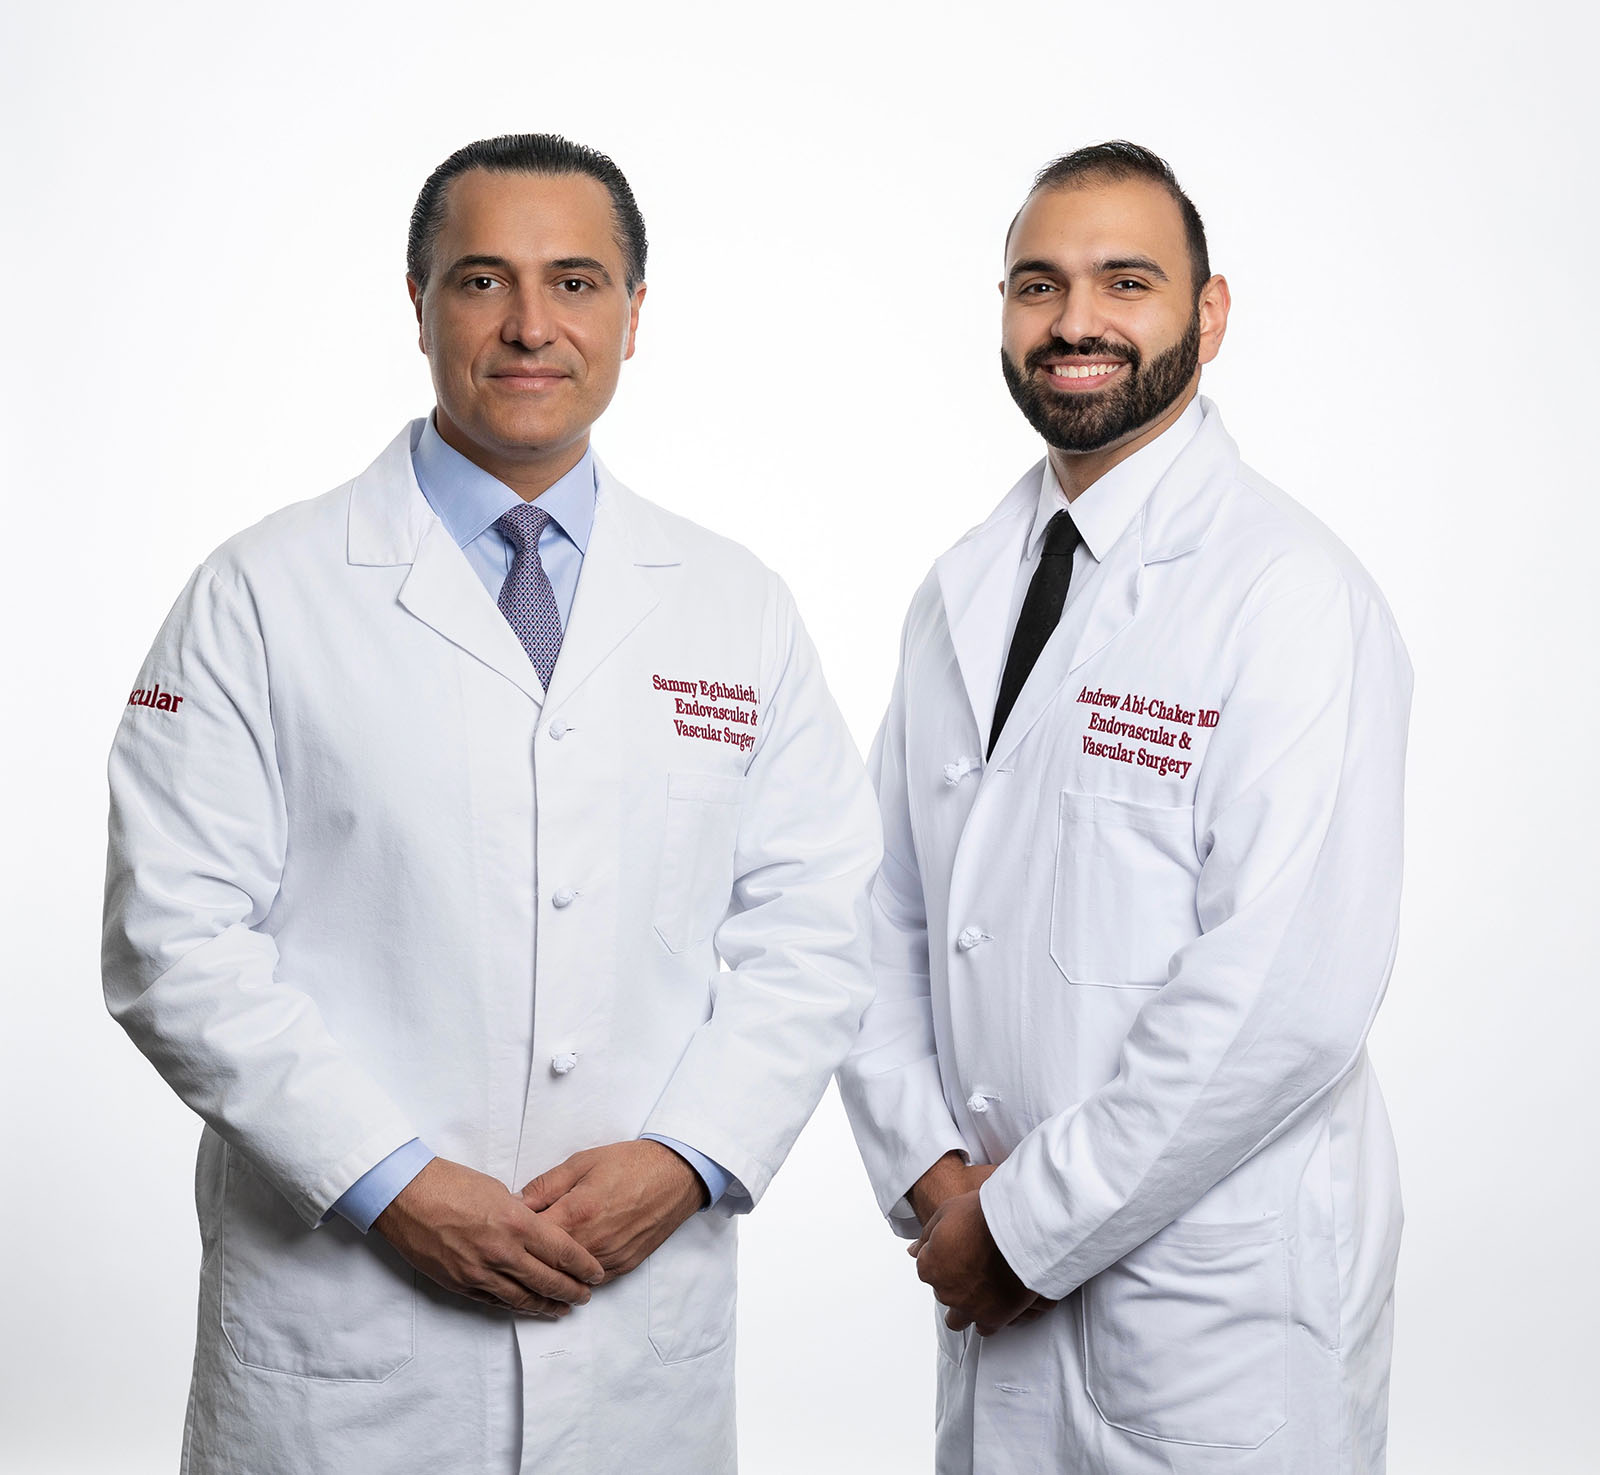 SCMSC Vascular and Endovascular surgeons Drs Sammy Eghbalieh and Andrew Abi-Chaker